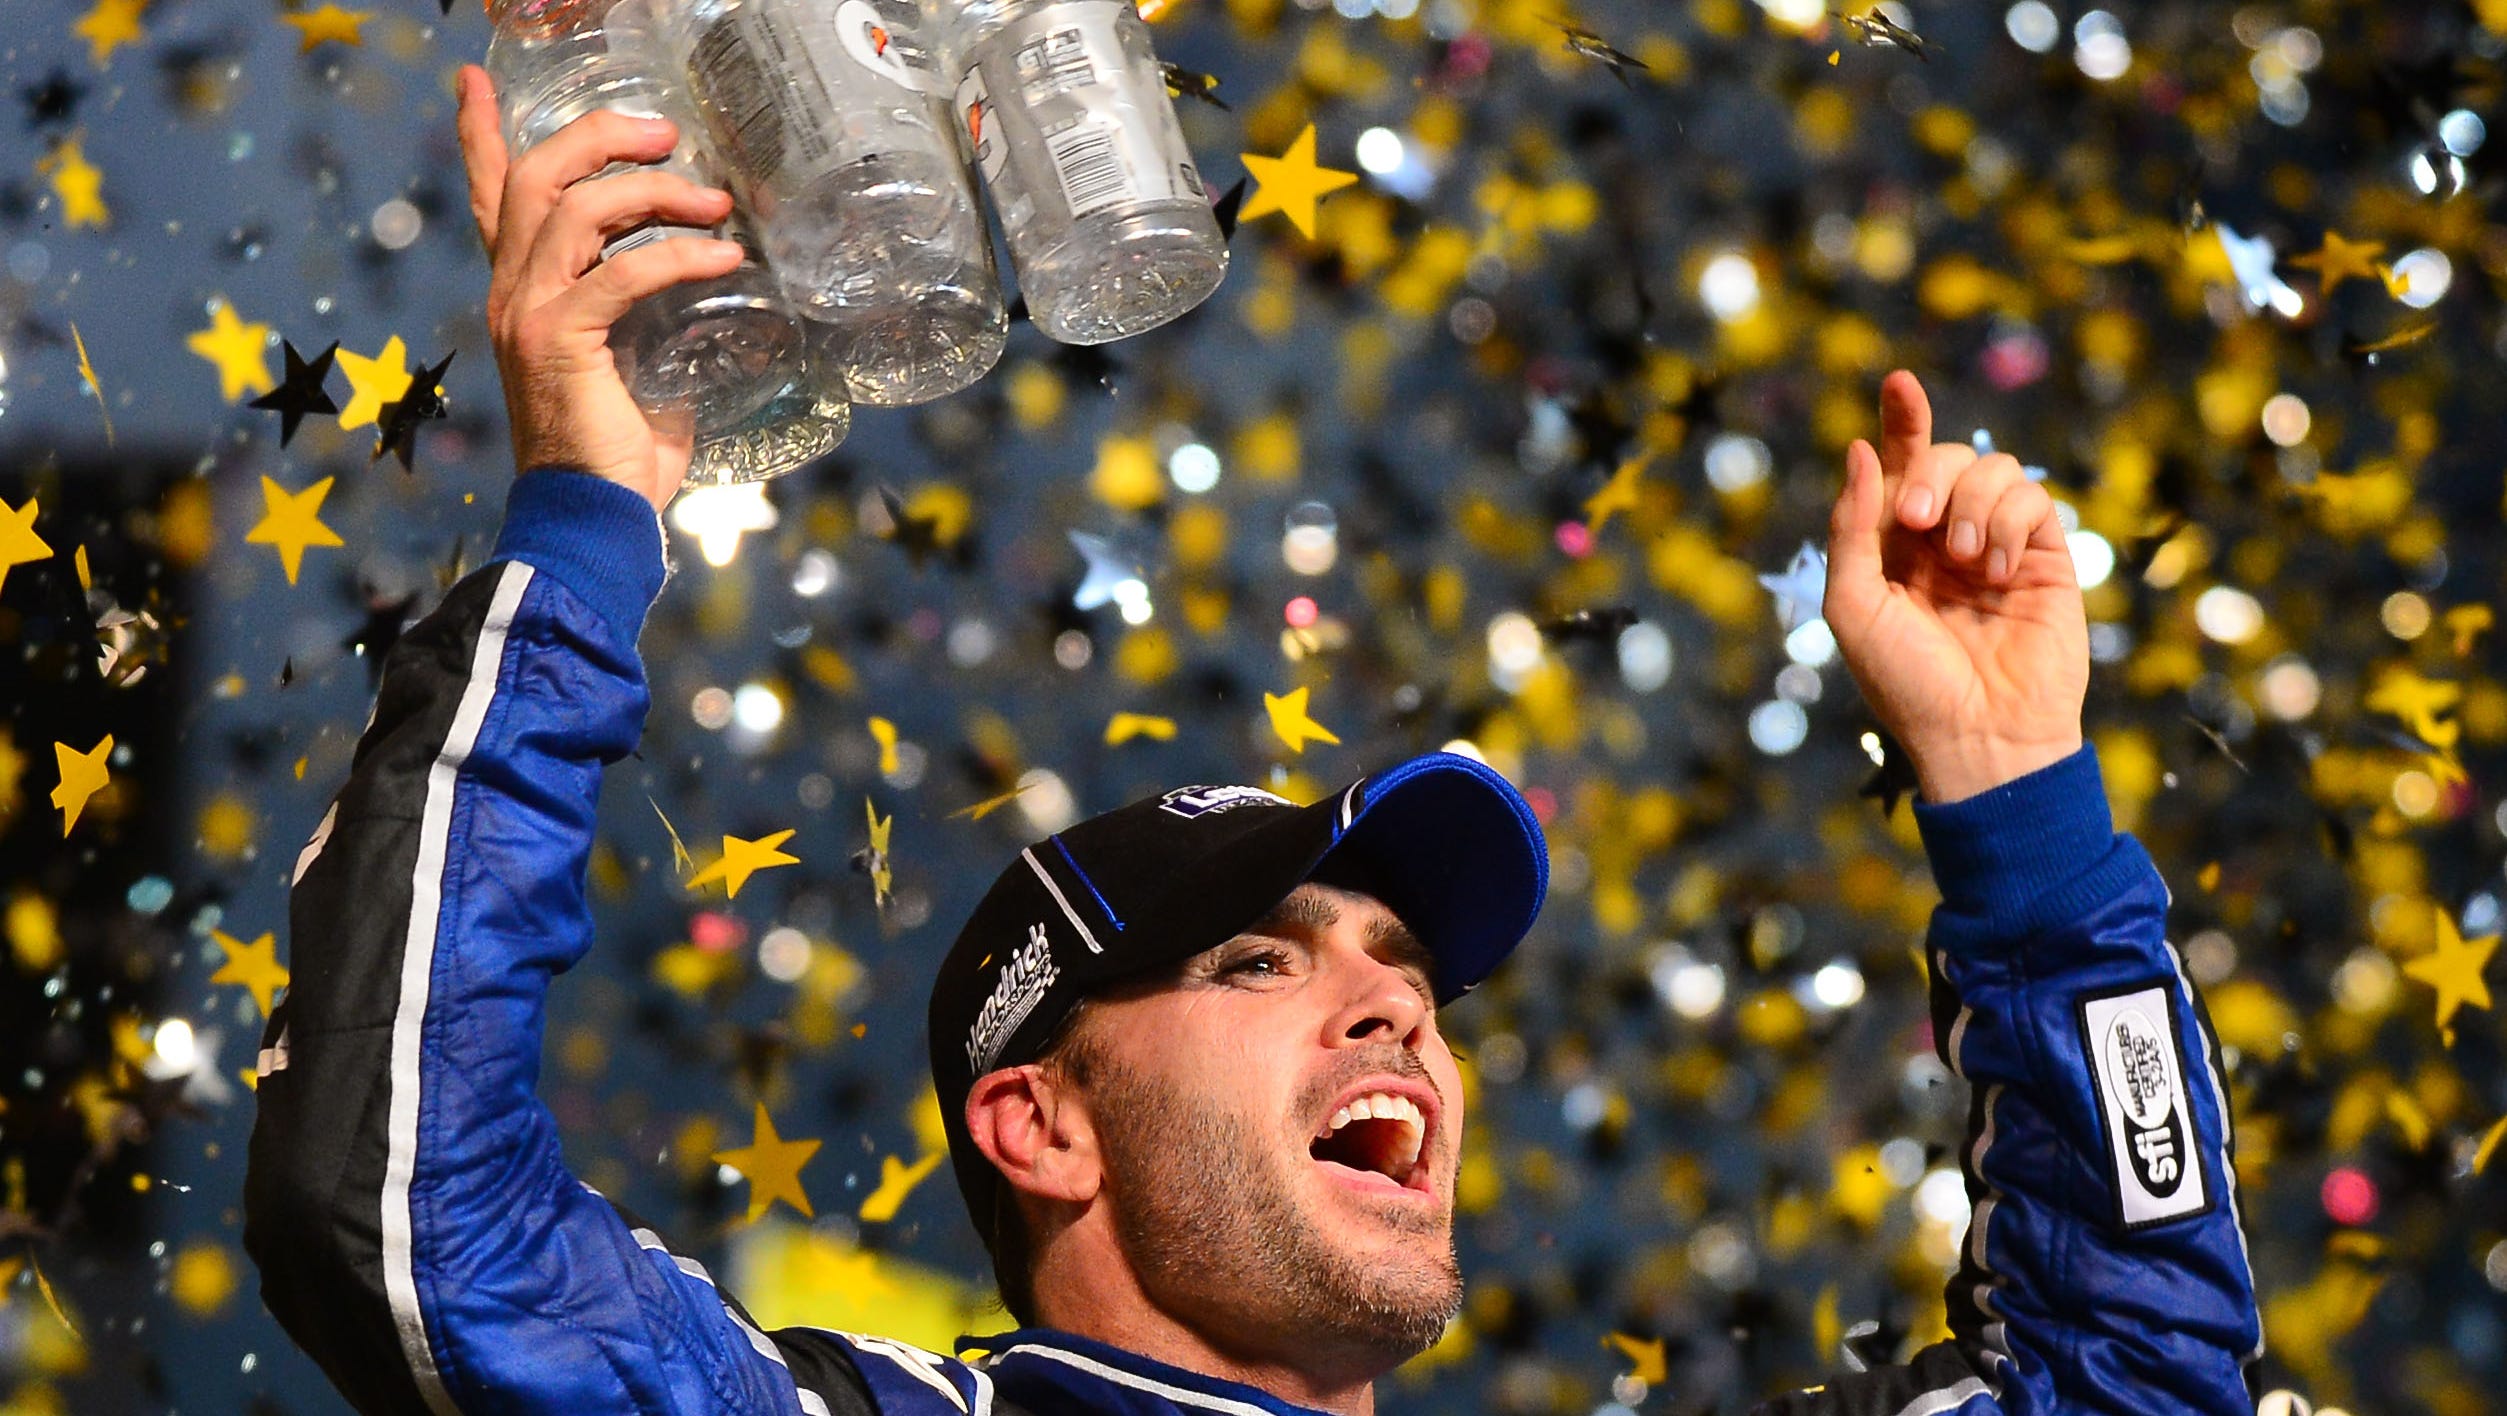 Titdirectory - Jimmie Johnson relishes moment, wows peers with title No. 6